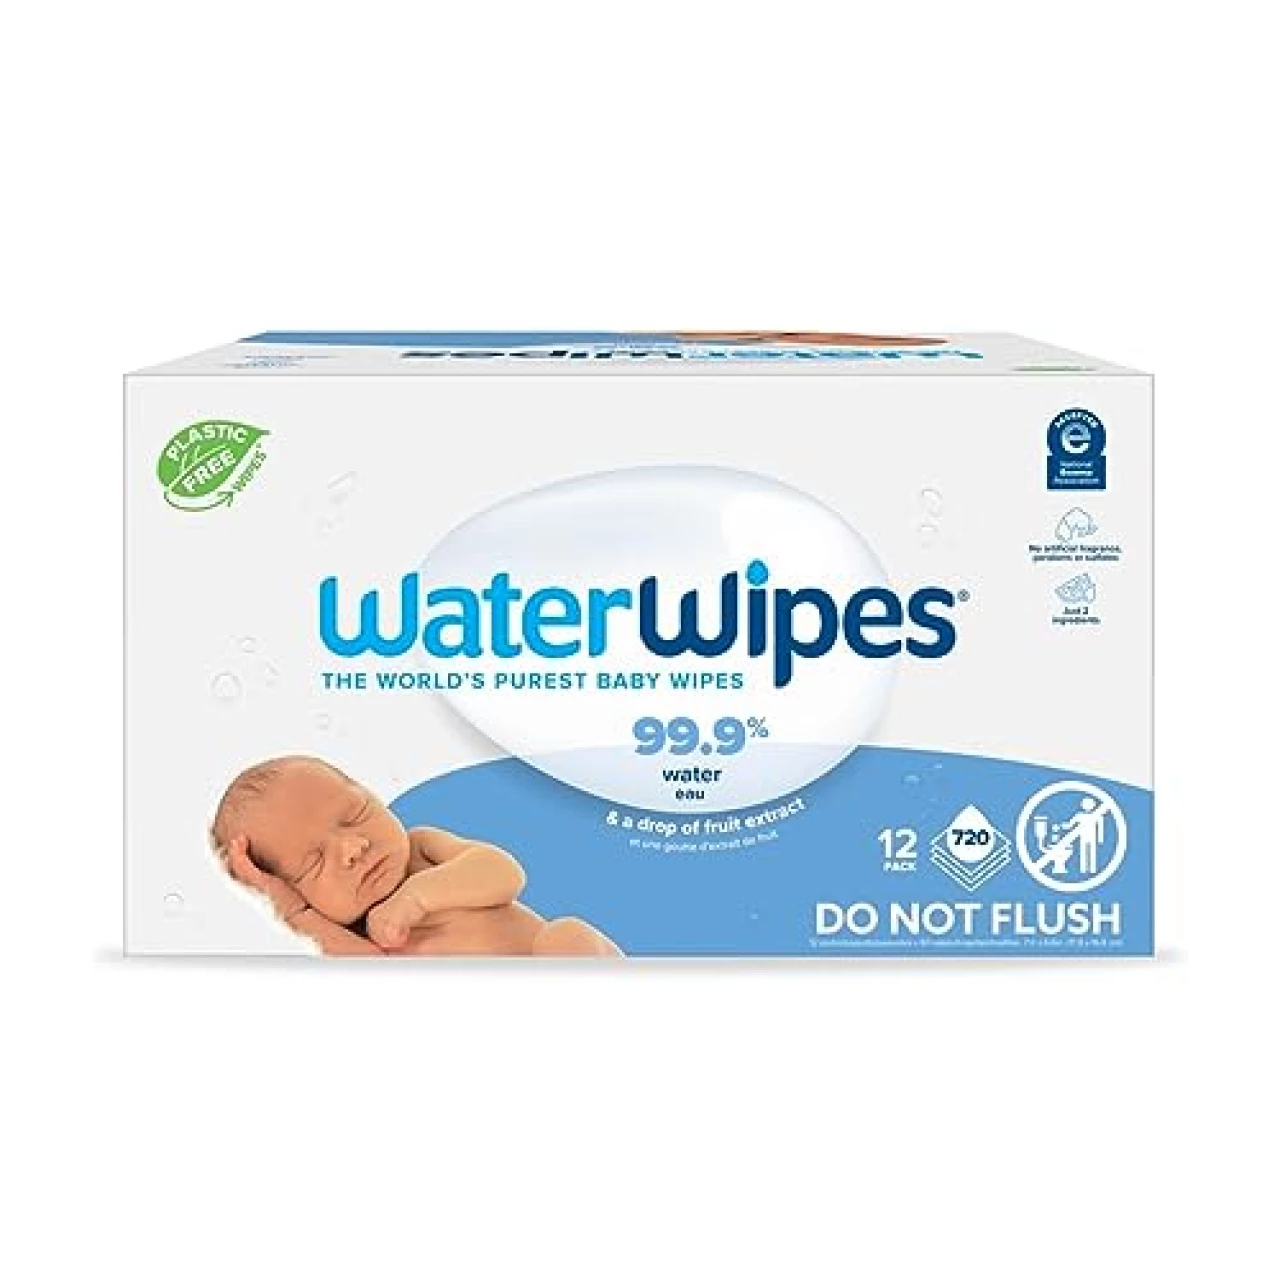 WaterWipes Plastic-Free Original Baby Wipes, 99.9% Water Based Wipes, Unscented &amp; Hypoallergenic for Sensitive Skin, 60 Count (Pack of 12), Packaging May Vary